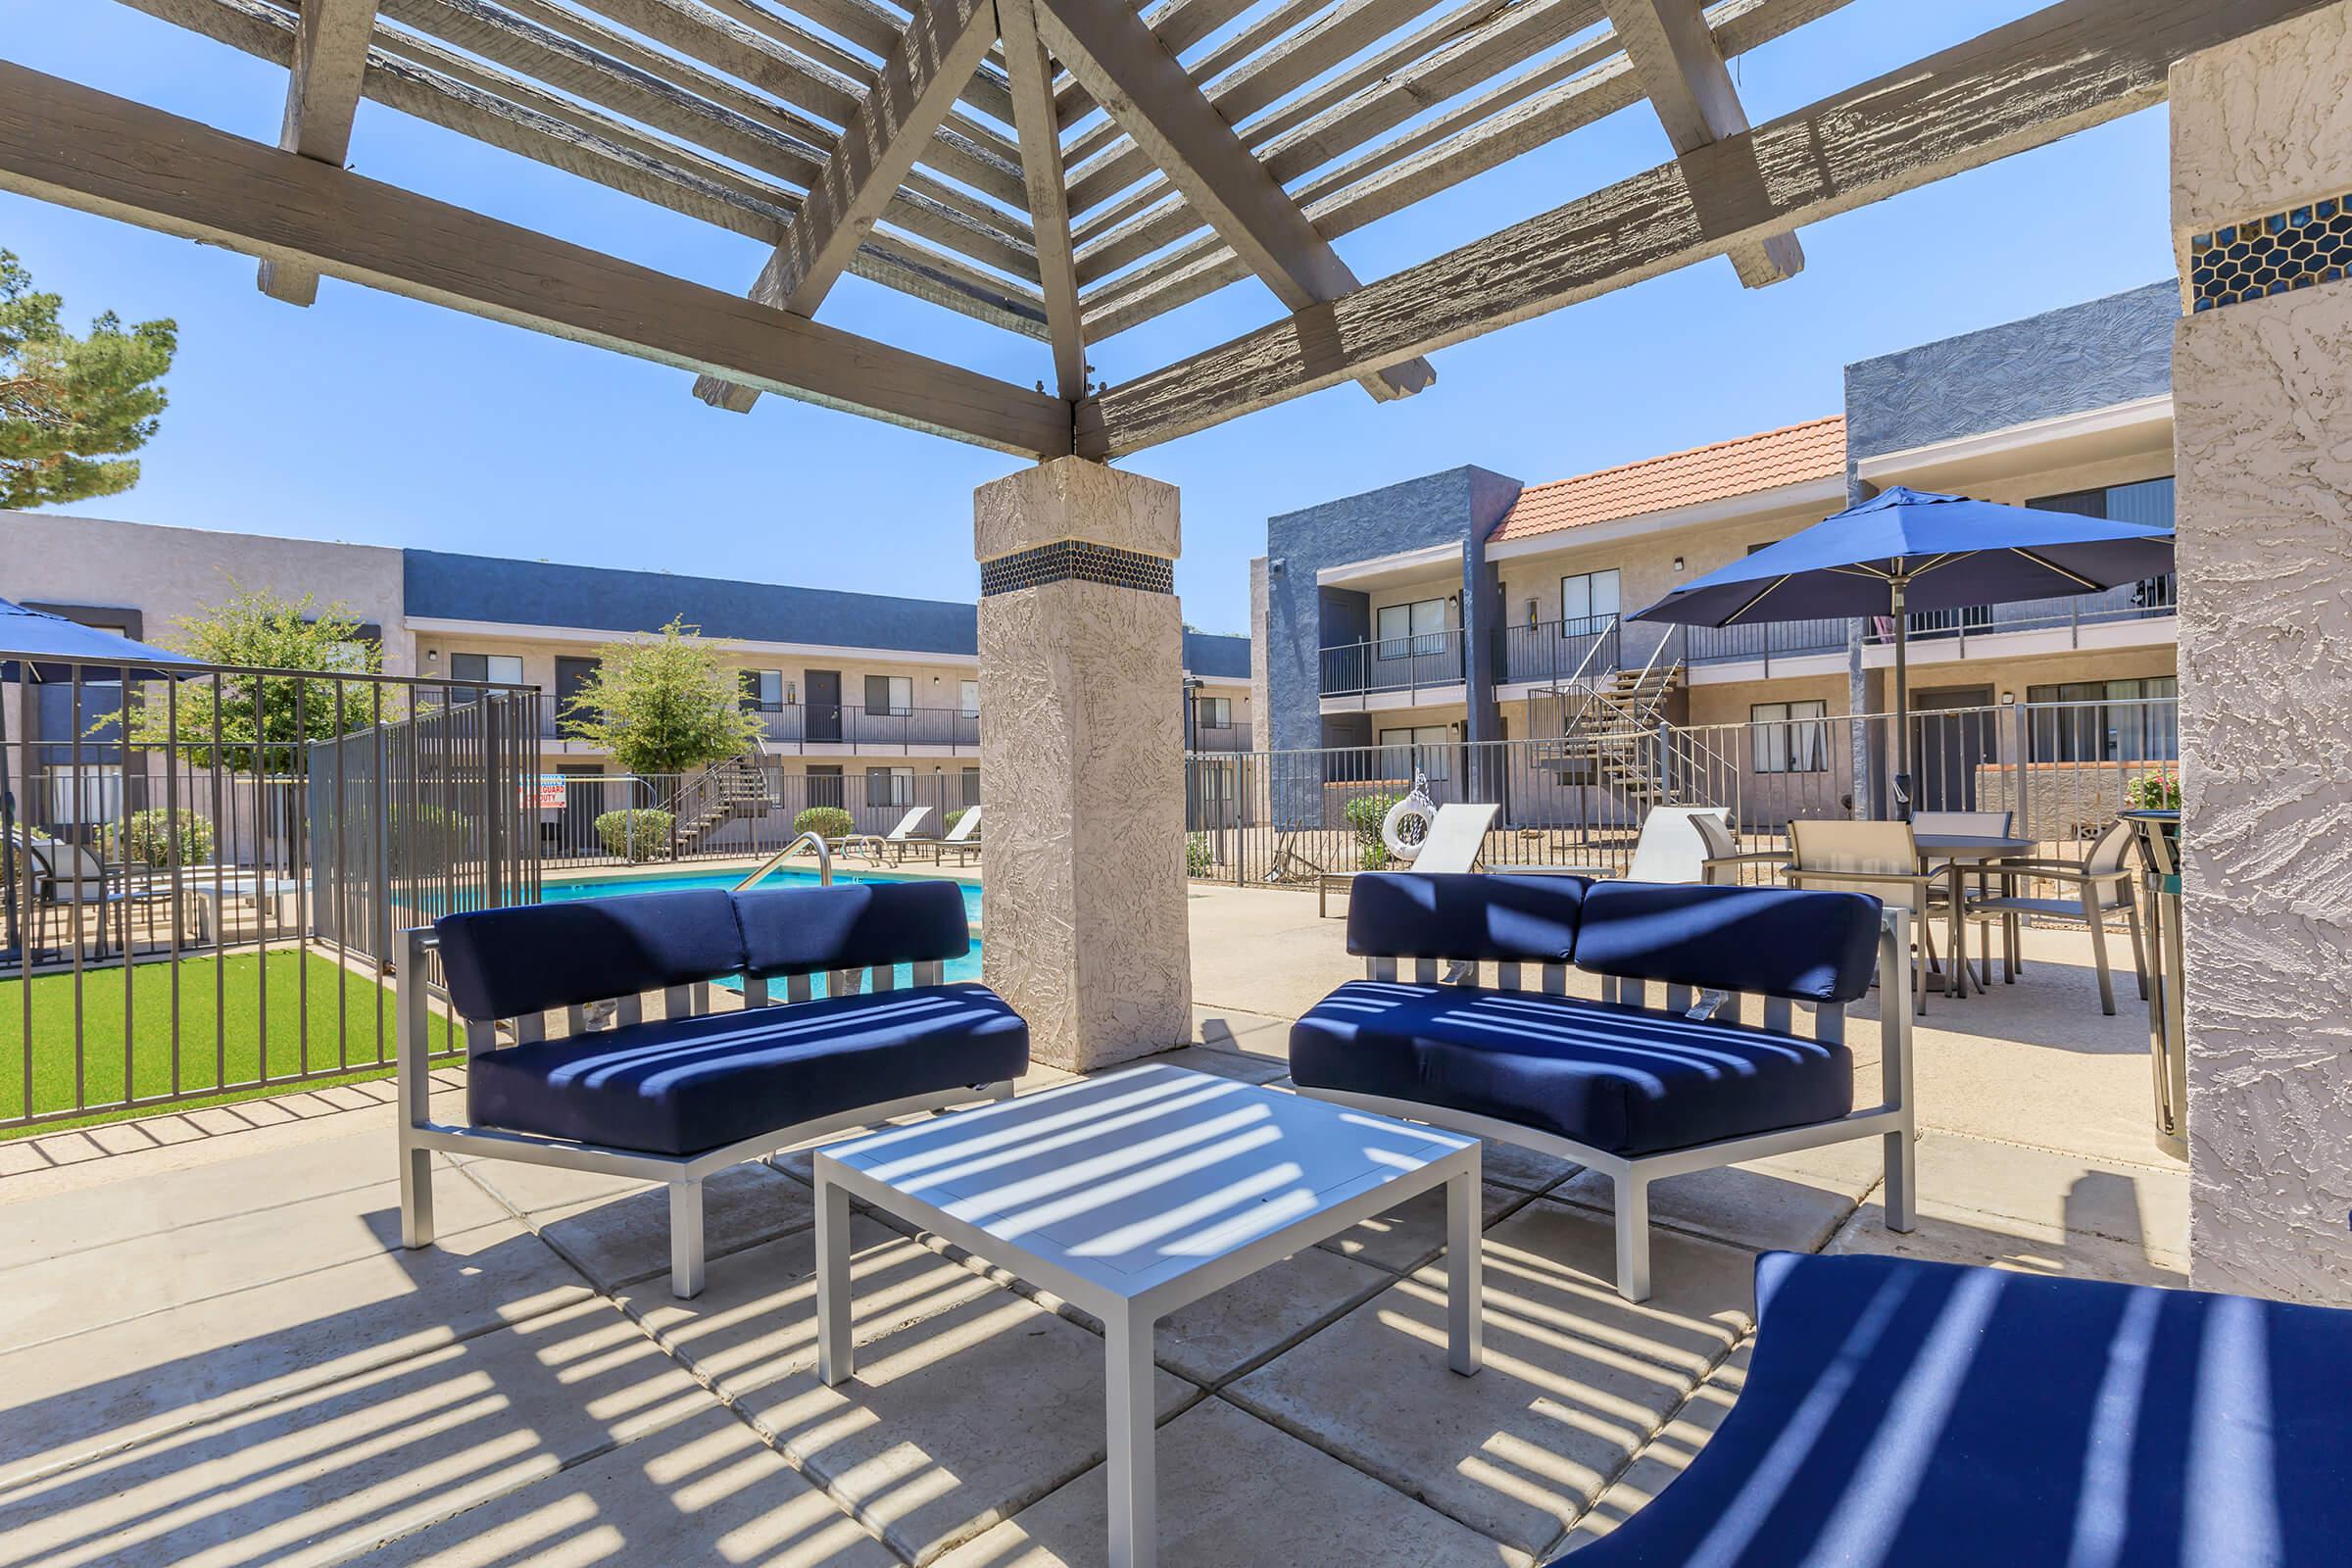 Shaded outdoor lounge area with blue couches and a table